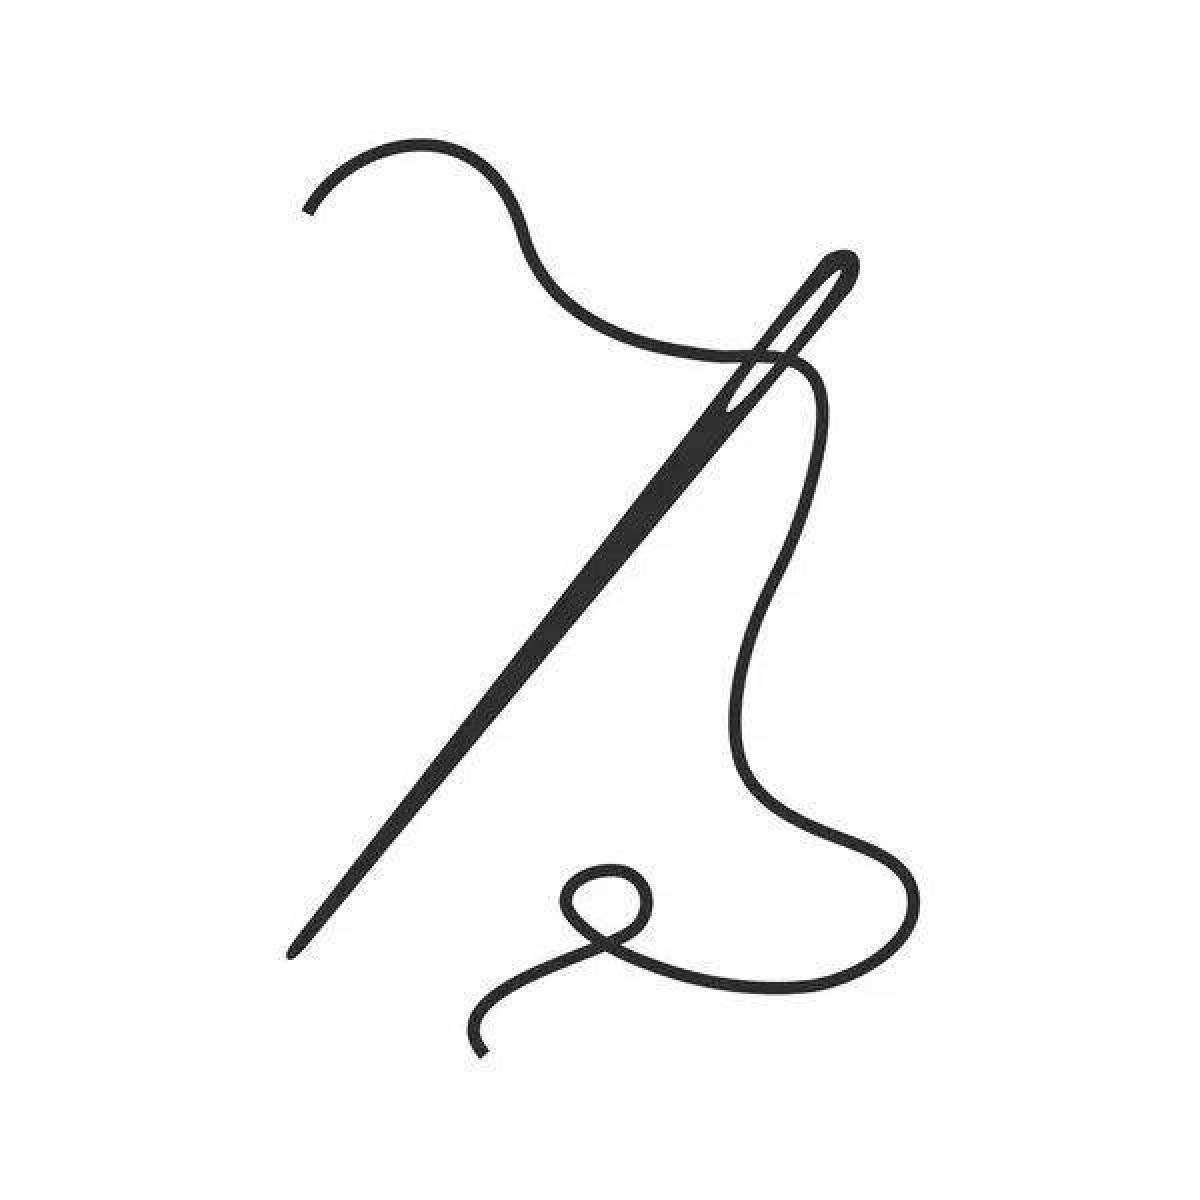 Punch needle coloring page